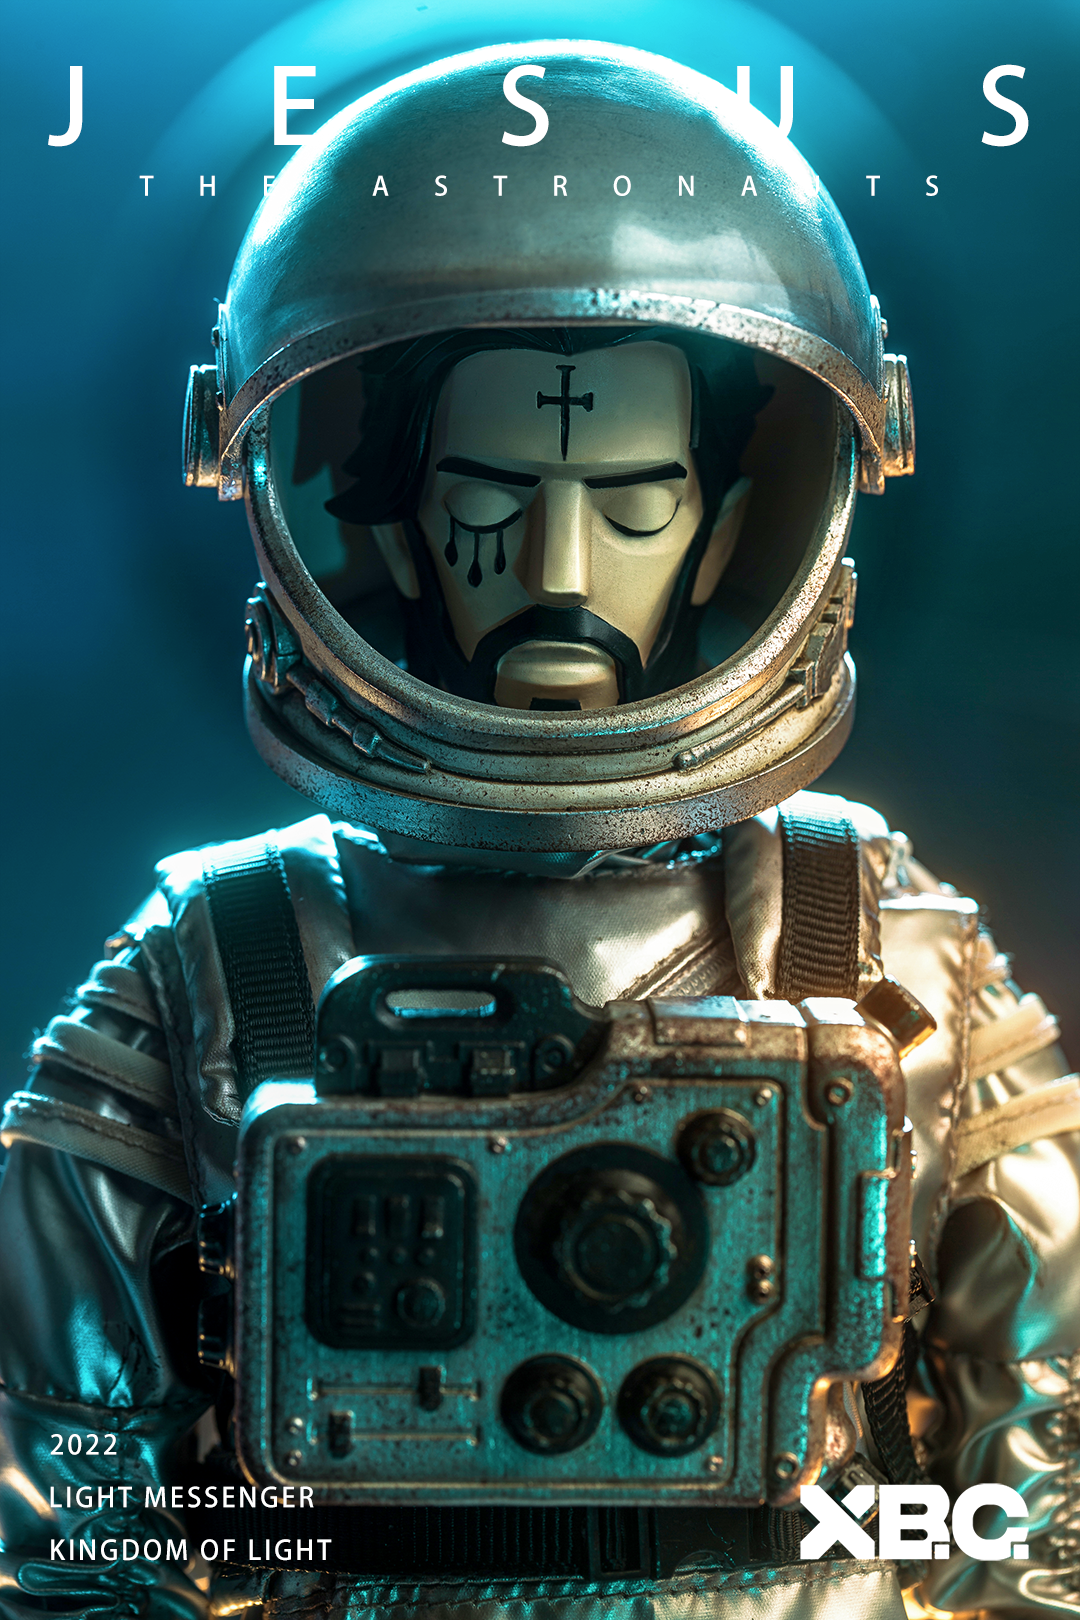 Jesus & Lucifer the Astronauts by WeArtDoing